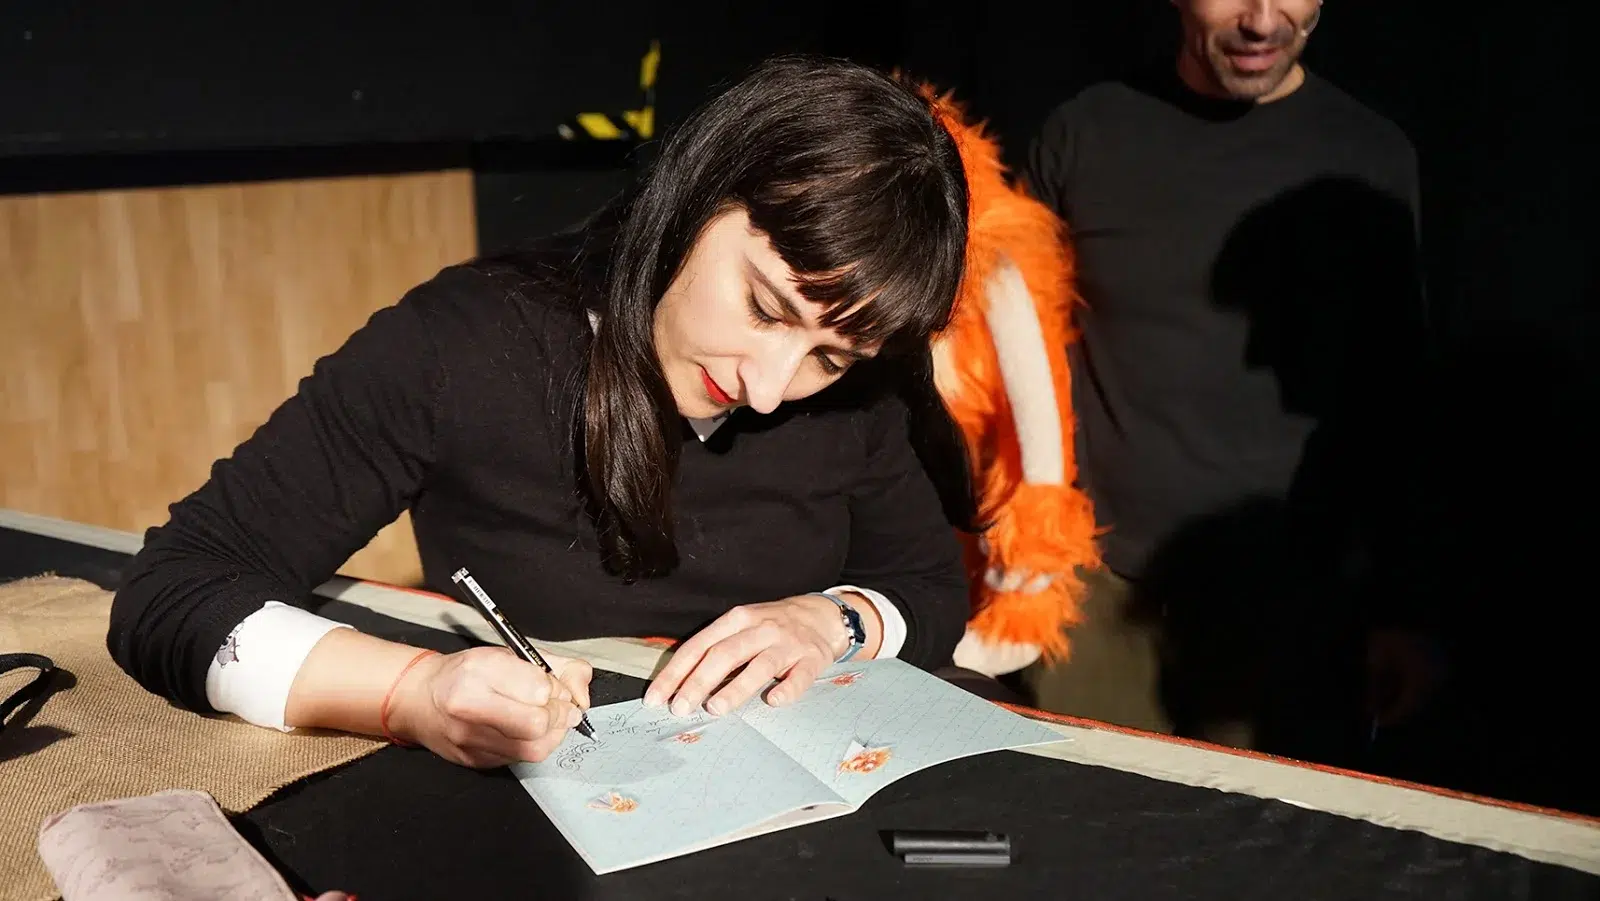 Mirilustra at the book signing session of The Quadern de MITA.